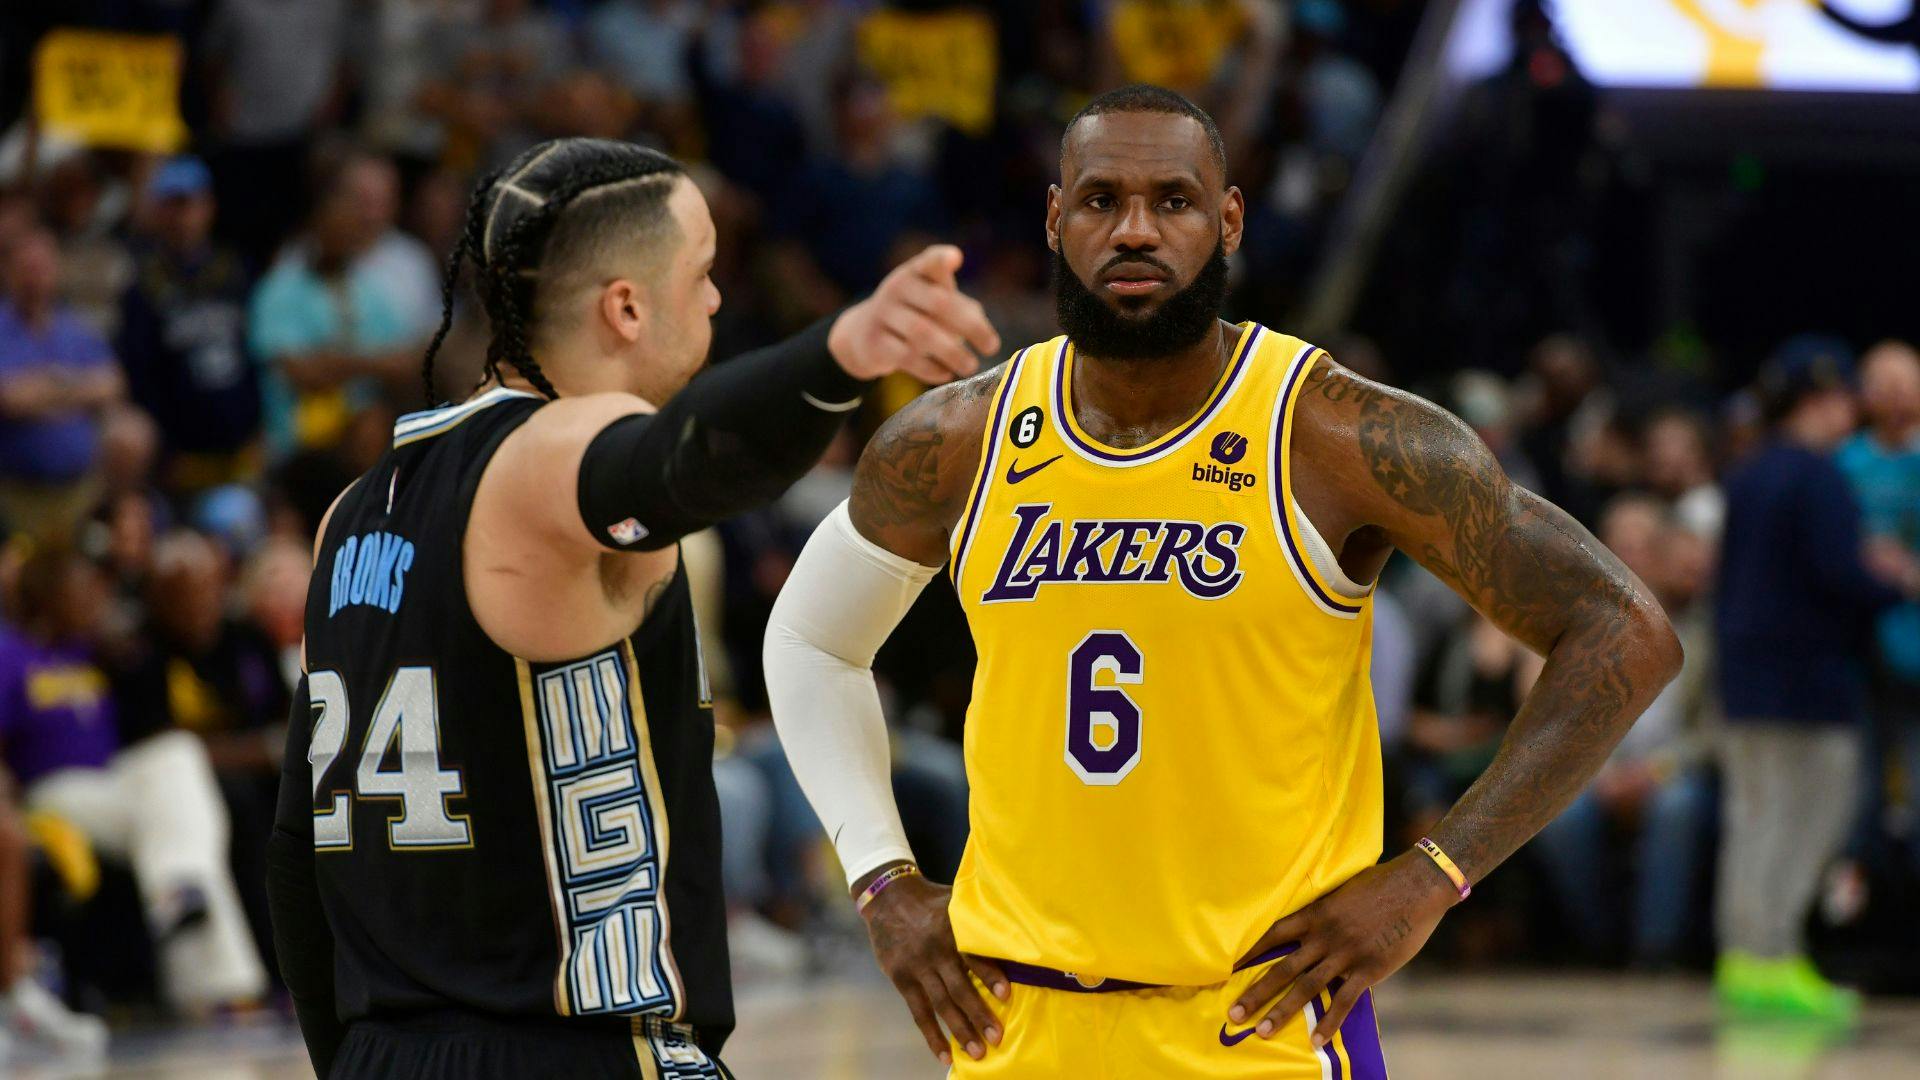 Dillon Brooks just gave a new scoring target for LeBron James after Game 2 victory